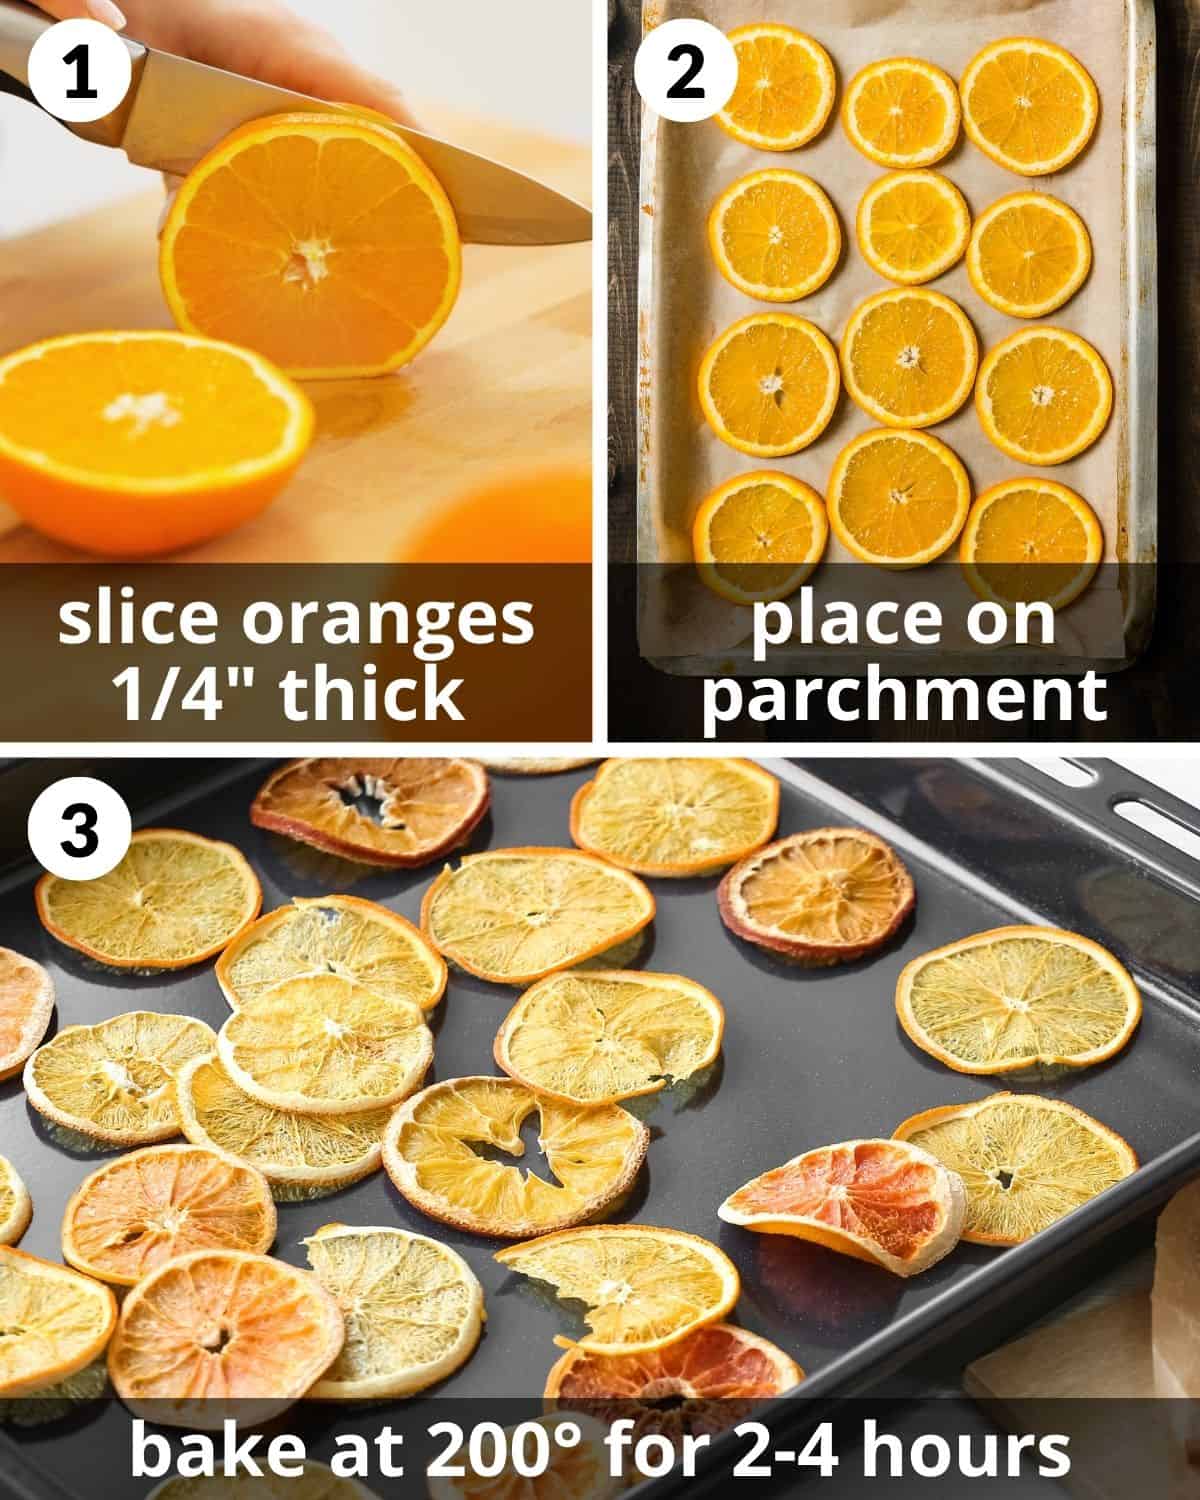 A 3 photo collage showing the assembly of dry oranges.